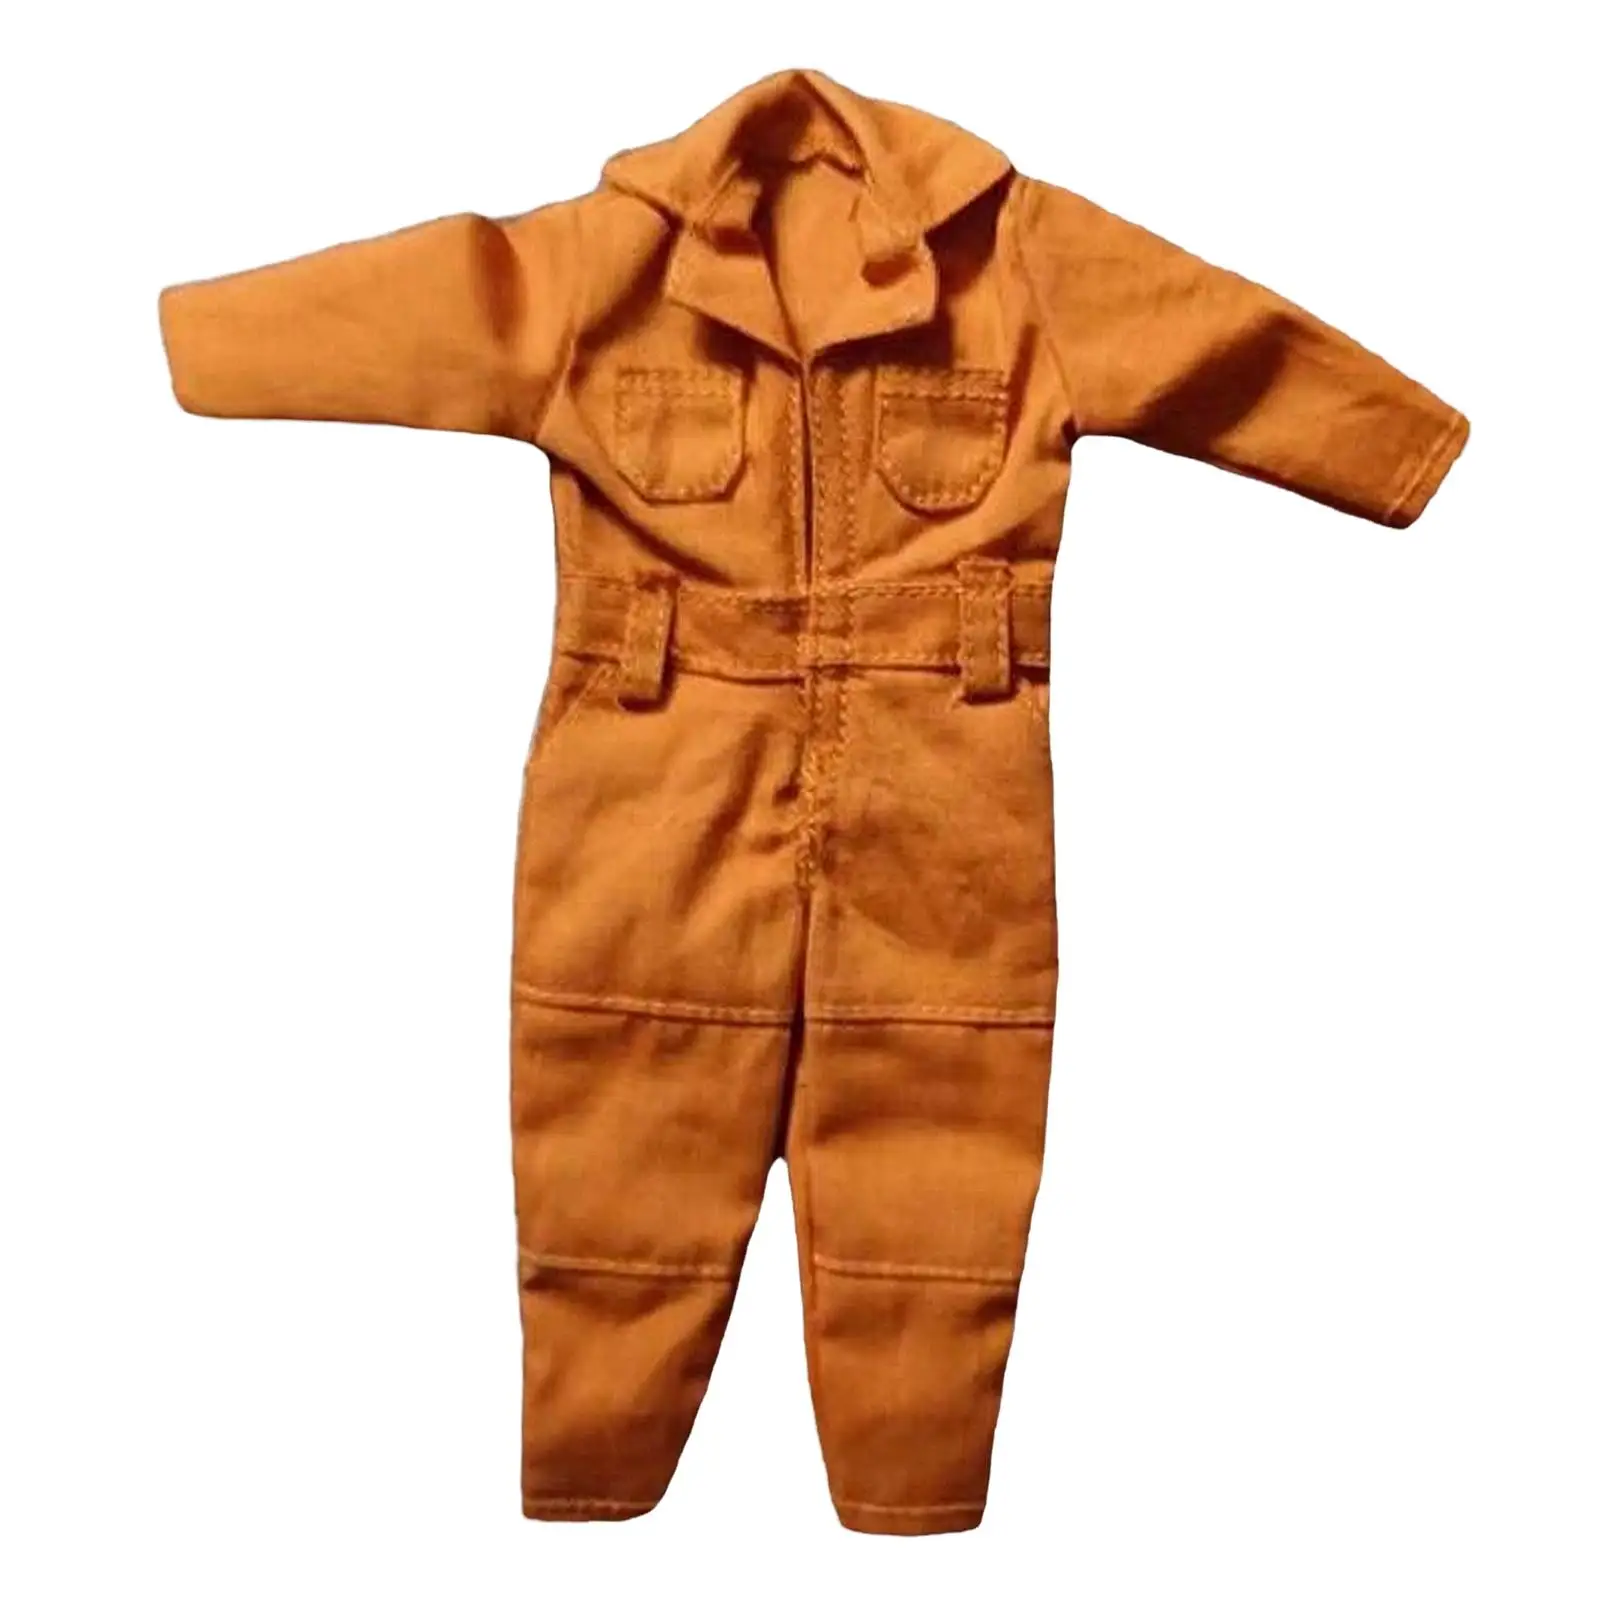 Action Figures Coverall 1/12 Scale Jumpsuit for 6 inch Action Figures Body